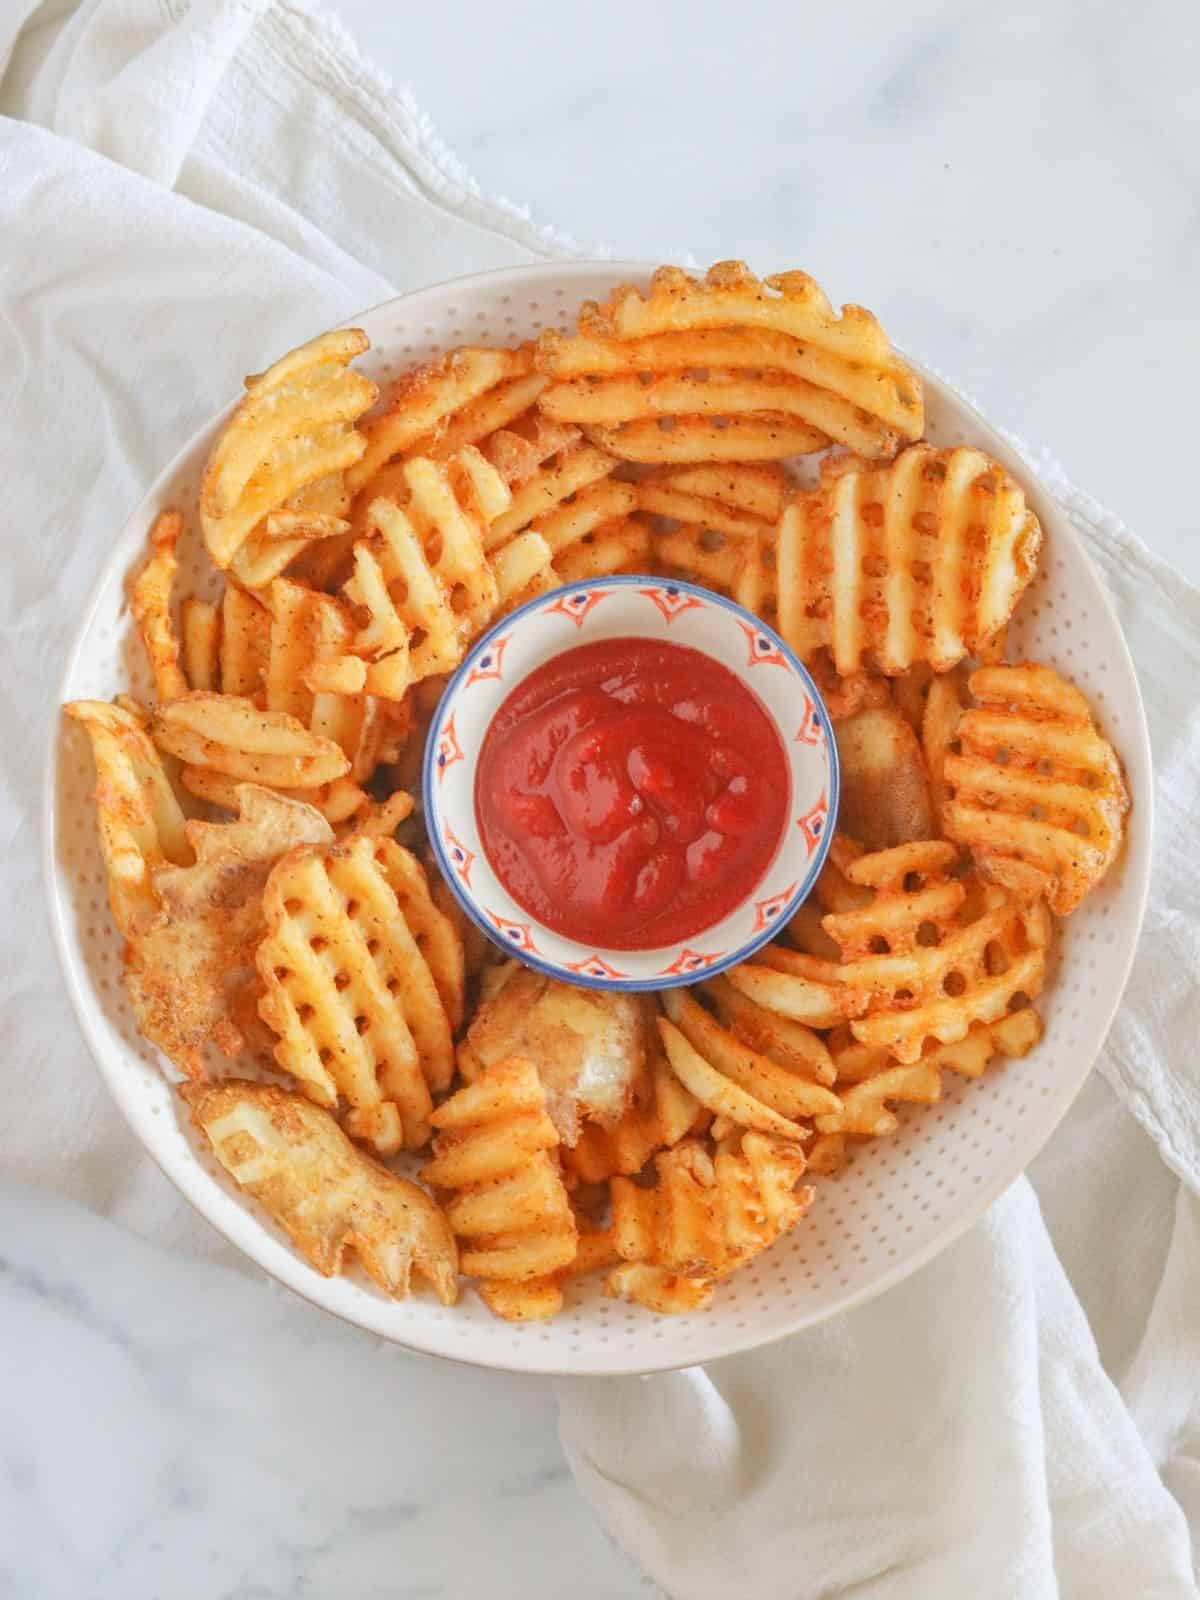 Criss cross vegetables in bowl with ketchup